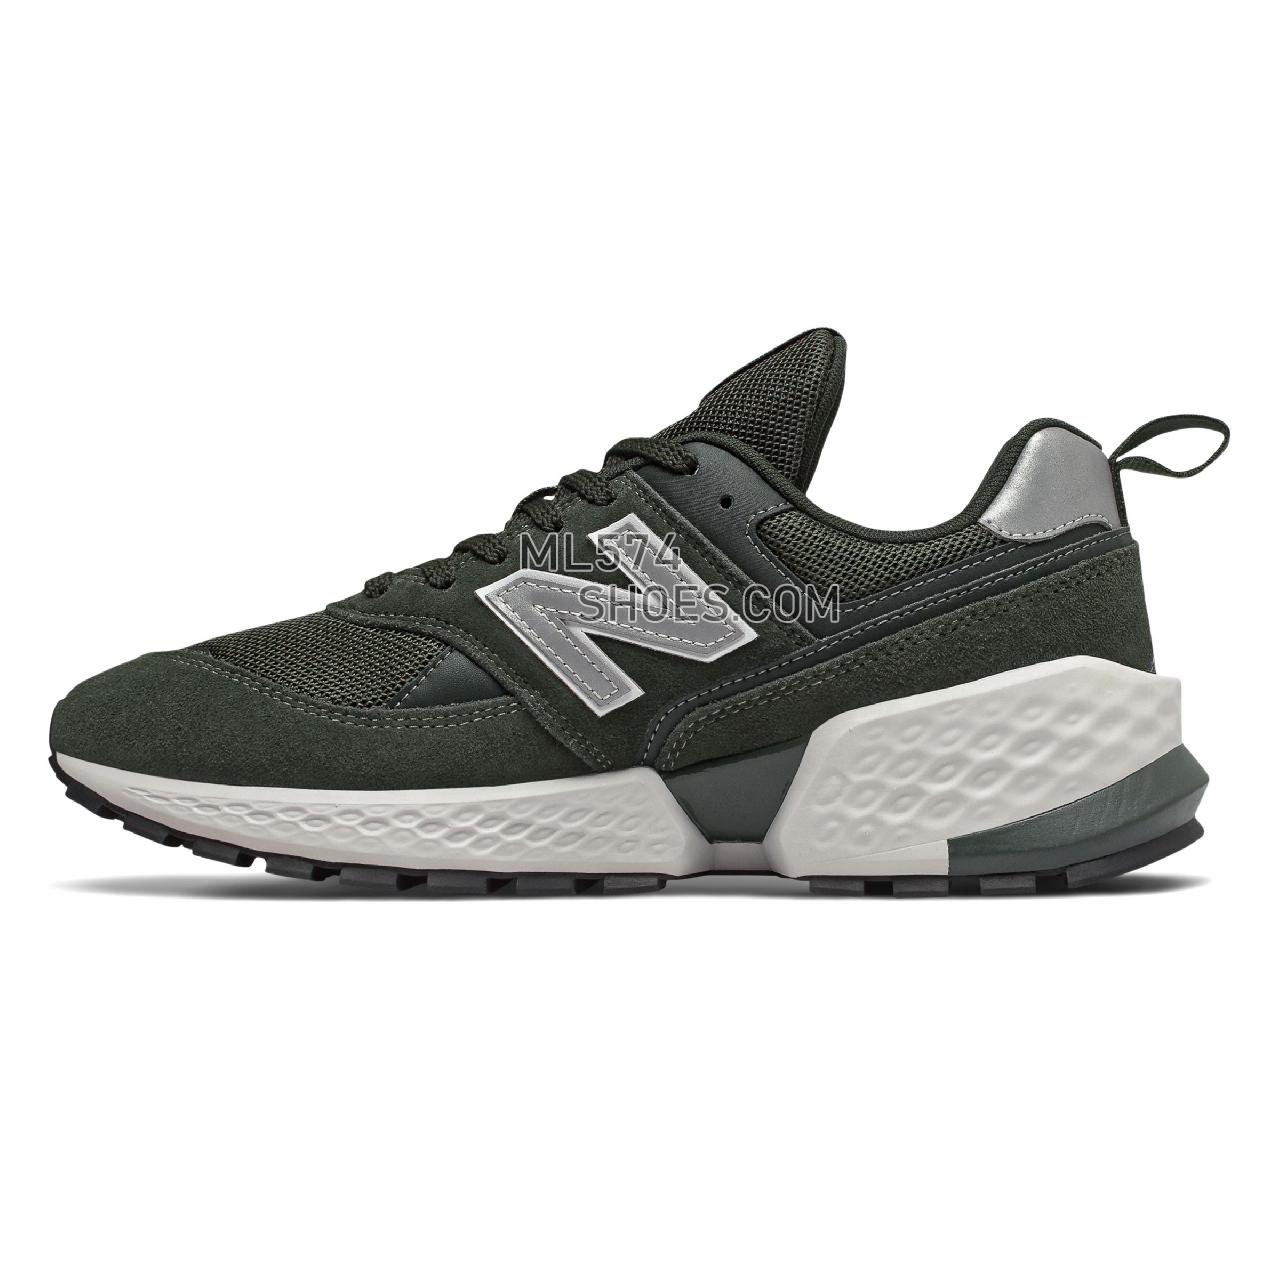 New Balance 574 Sport - Men's Sport Style Sneakers - Rifle Green with Silver Metallic - MS574ACM